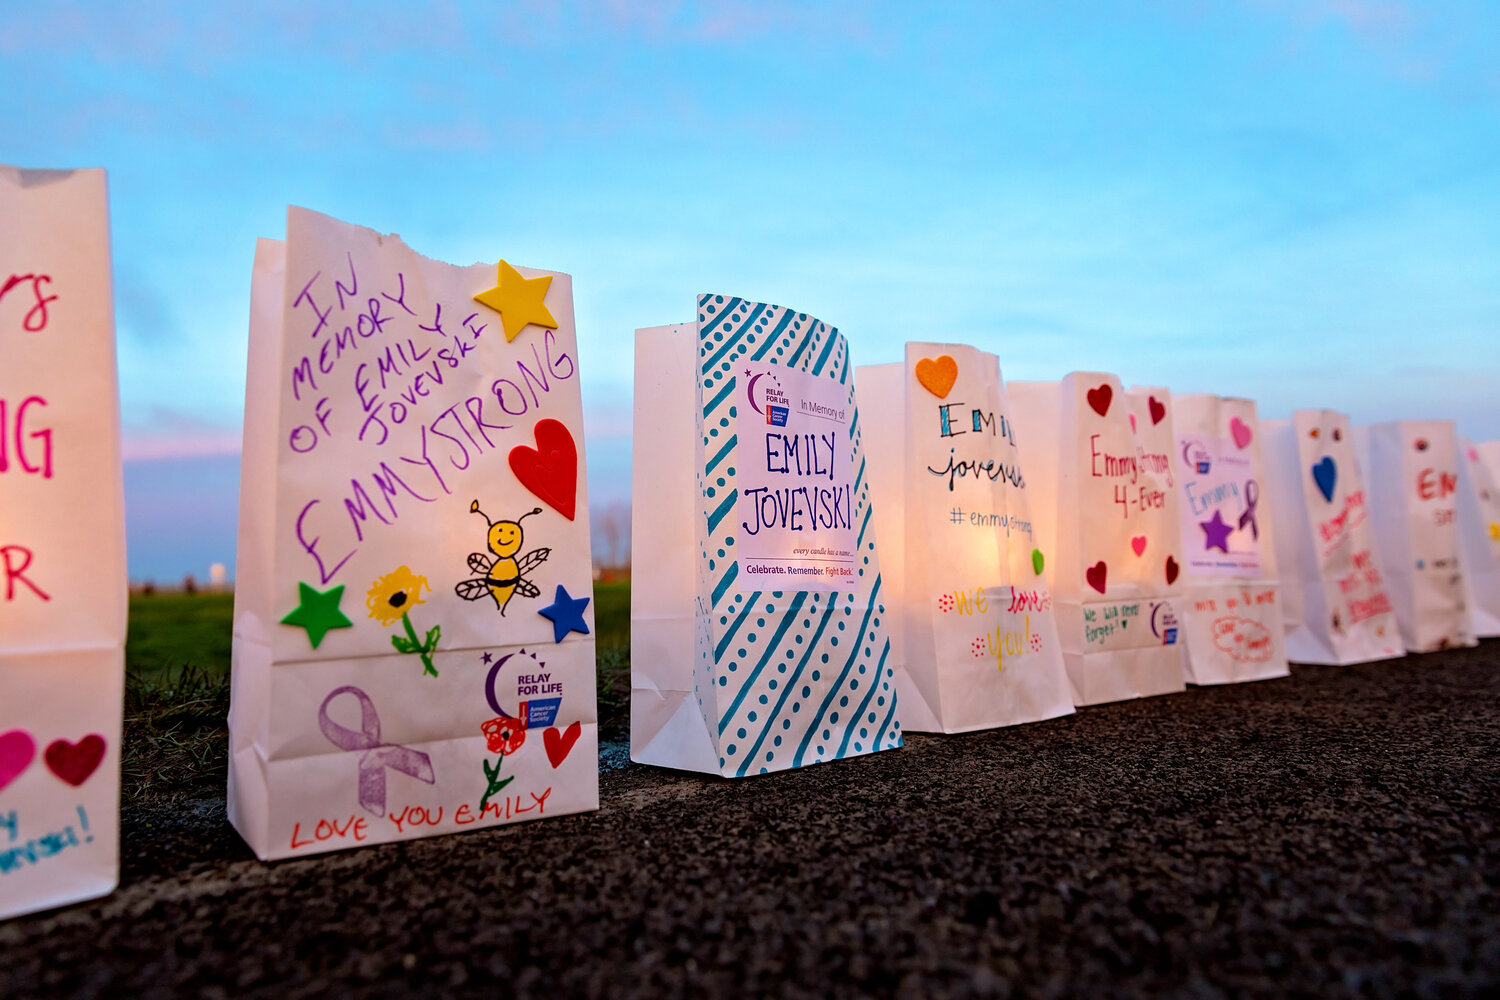 Luminaries will shine bright as Hofstra’s Relay For Life returns to campus on Saturday, May 6.